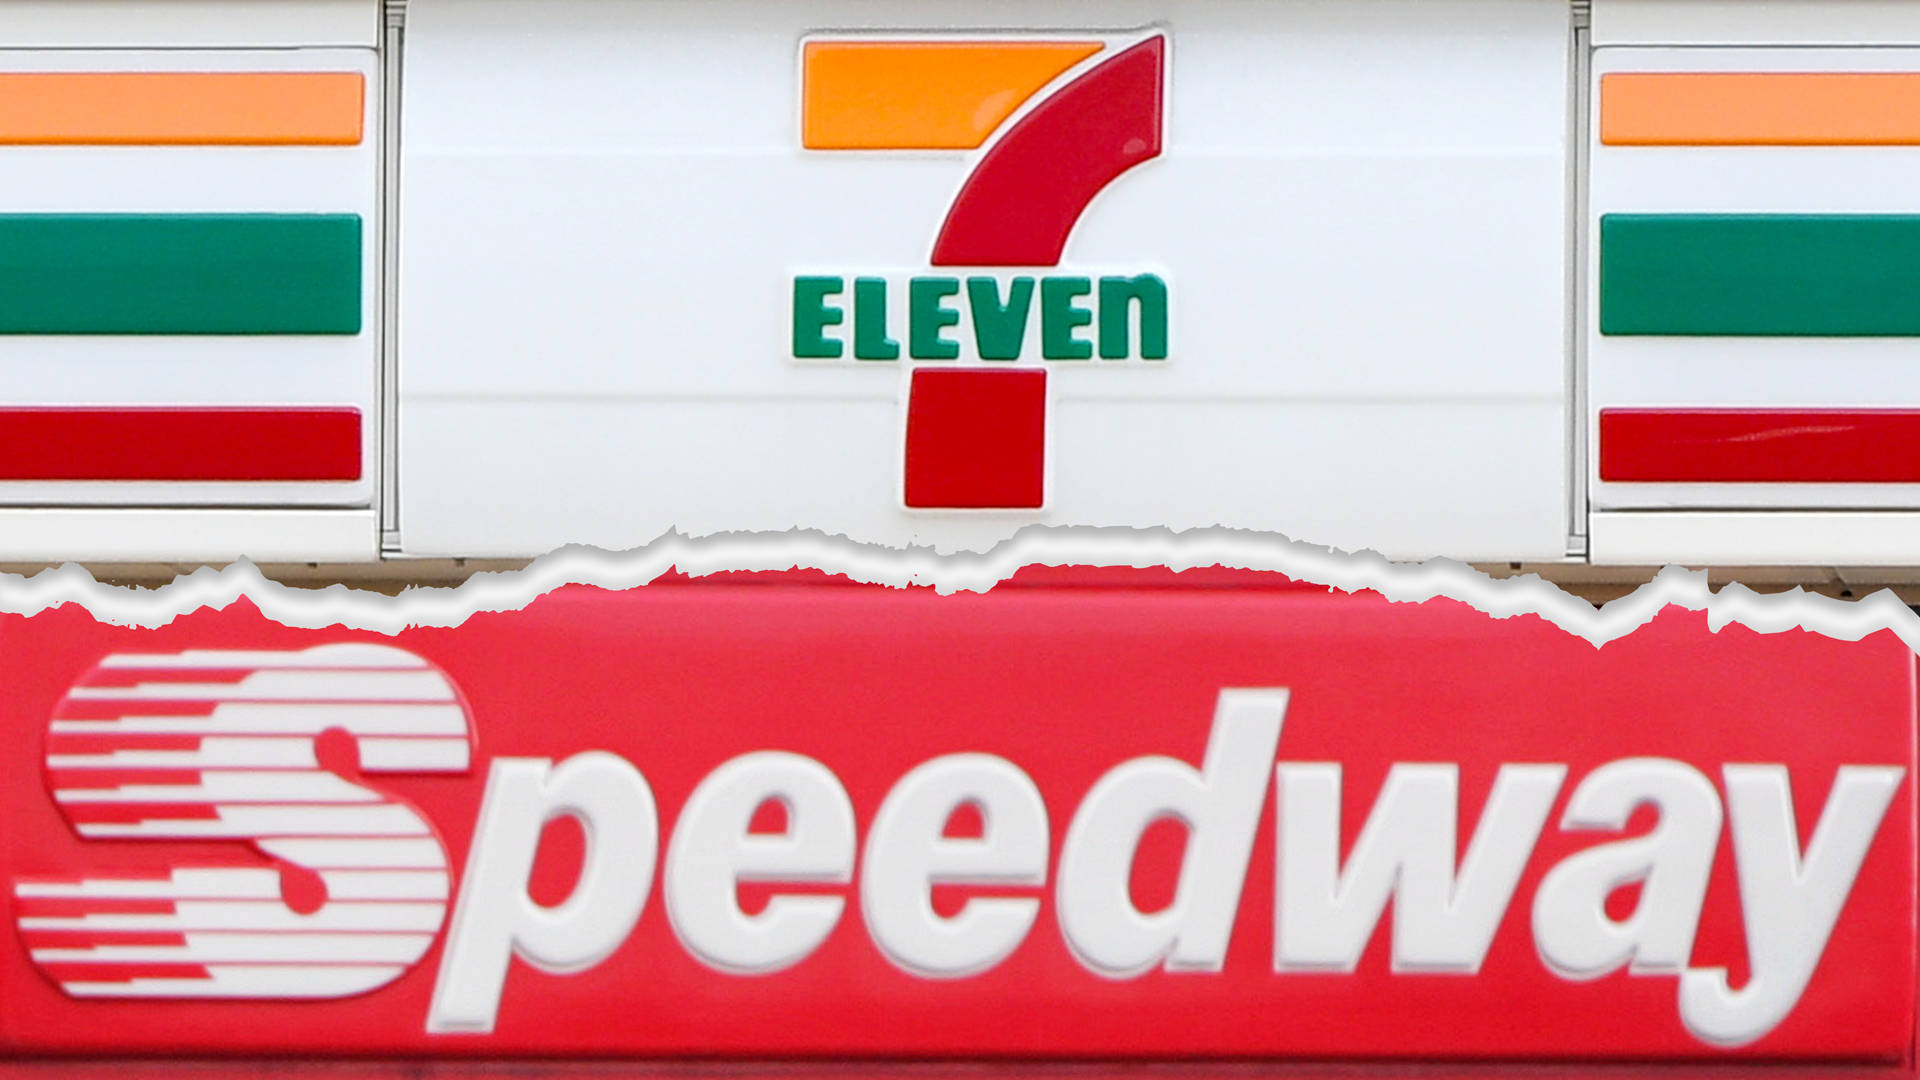 7 Eleven And Speedway Background